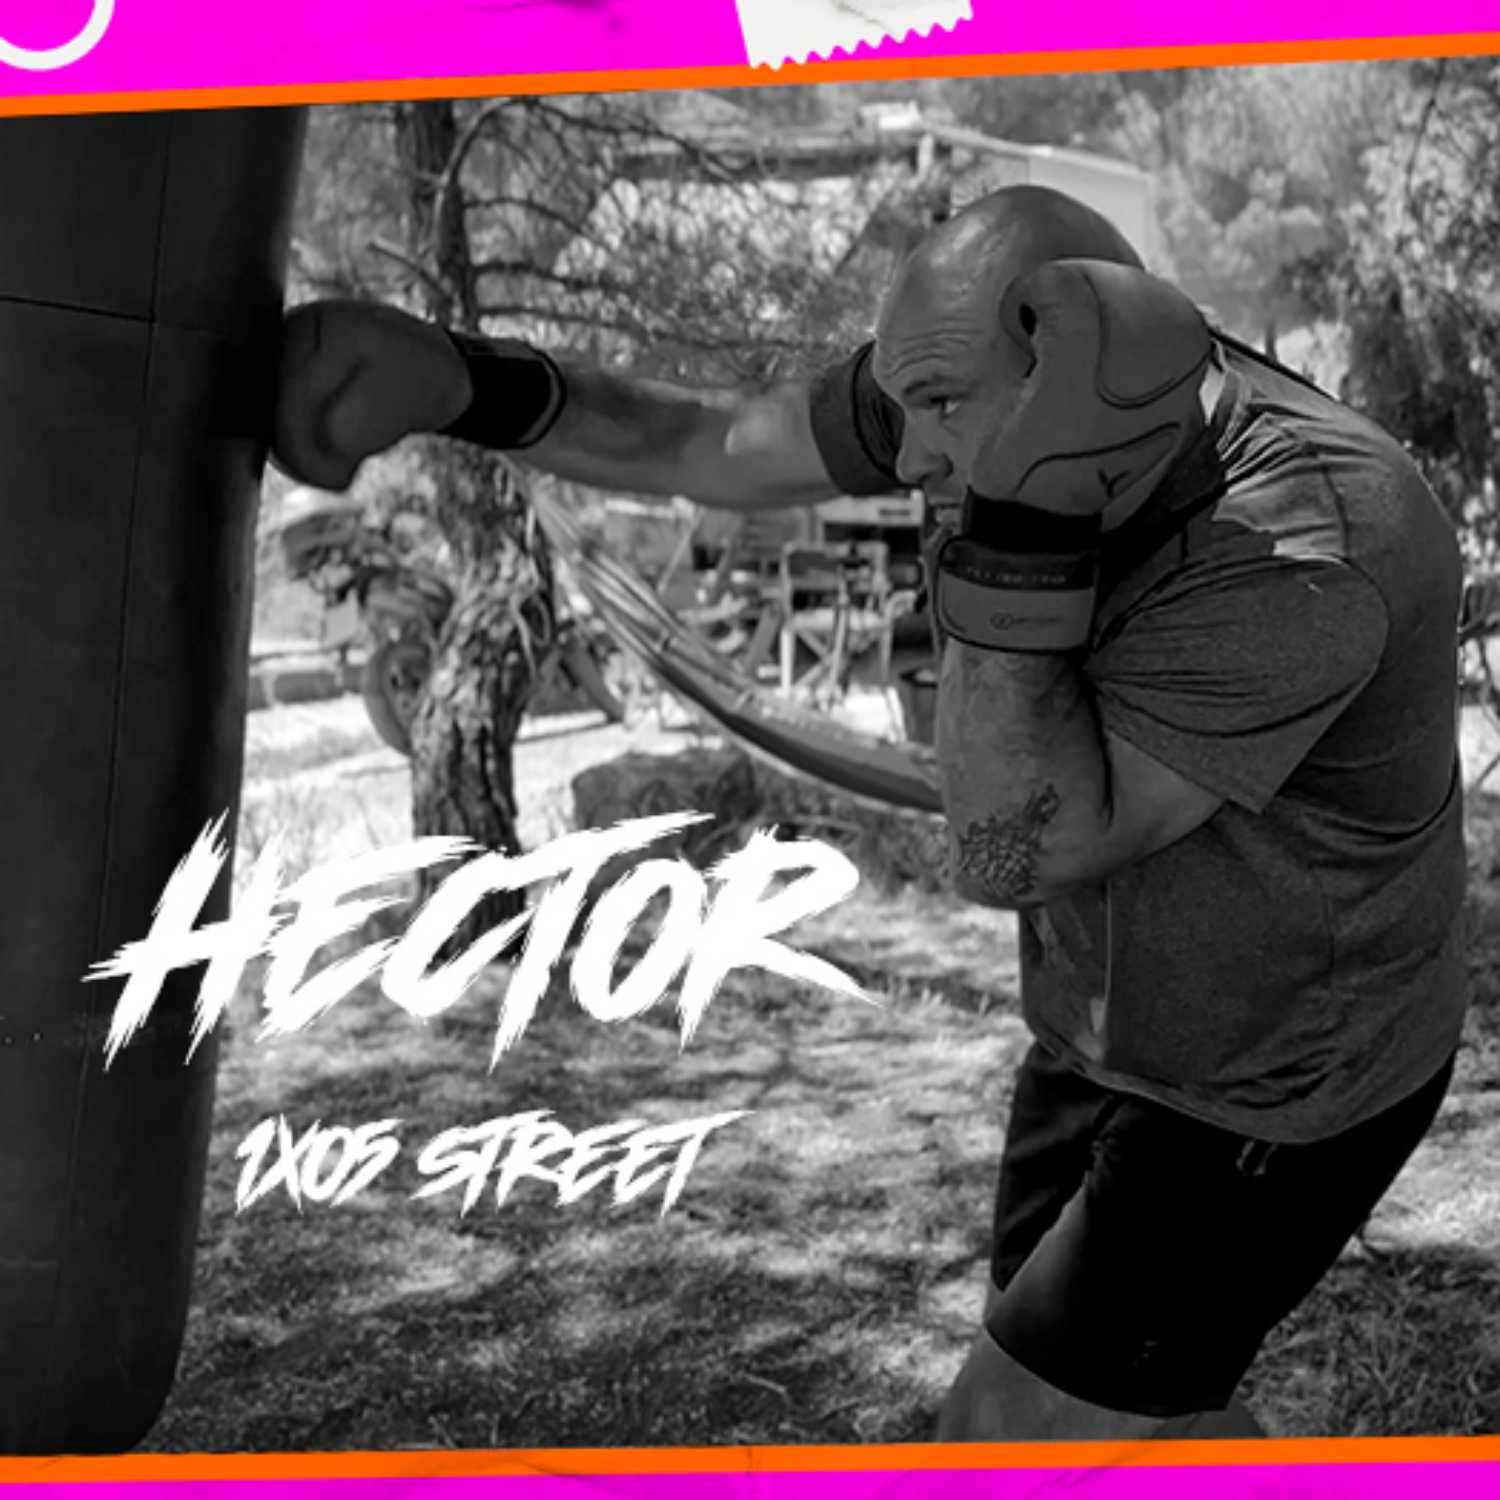 ⁣A CUCHILLO STREET 1X05 ft. HECTOR (OUTSIDER)